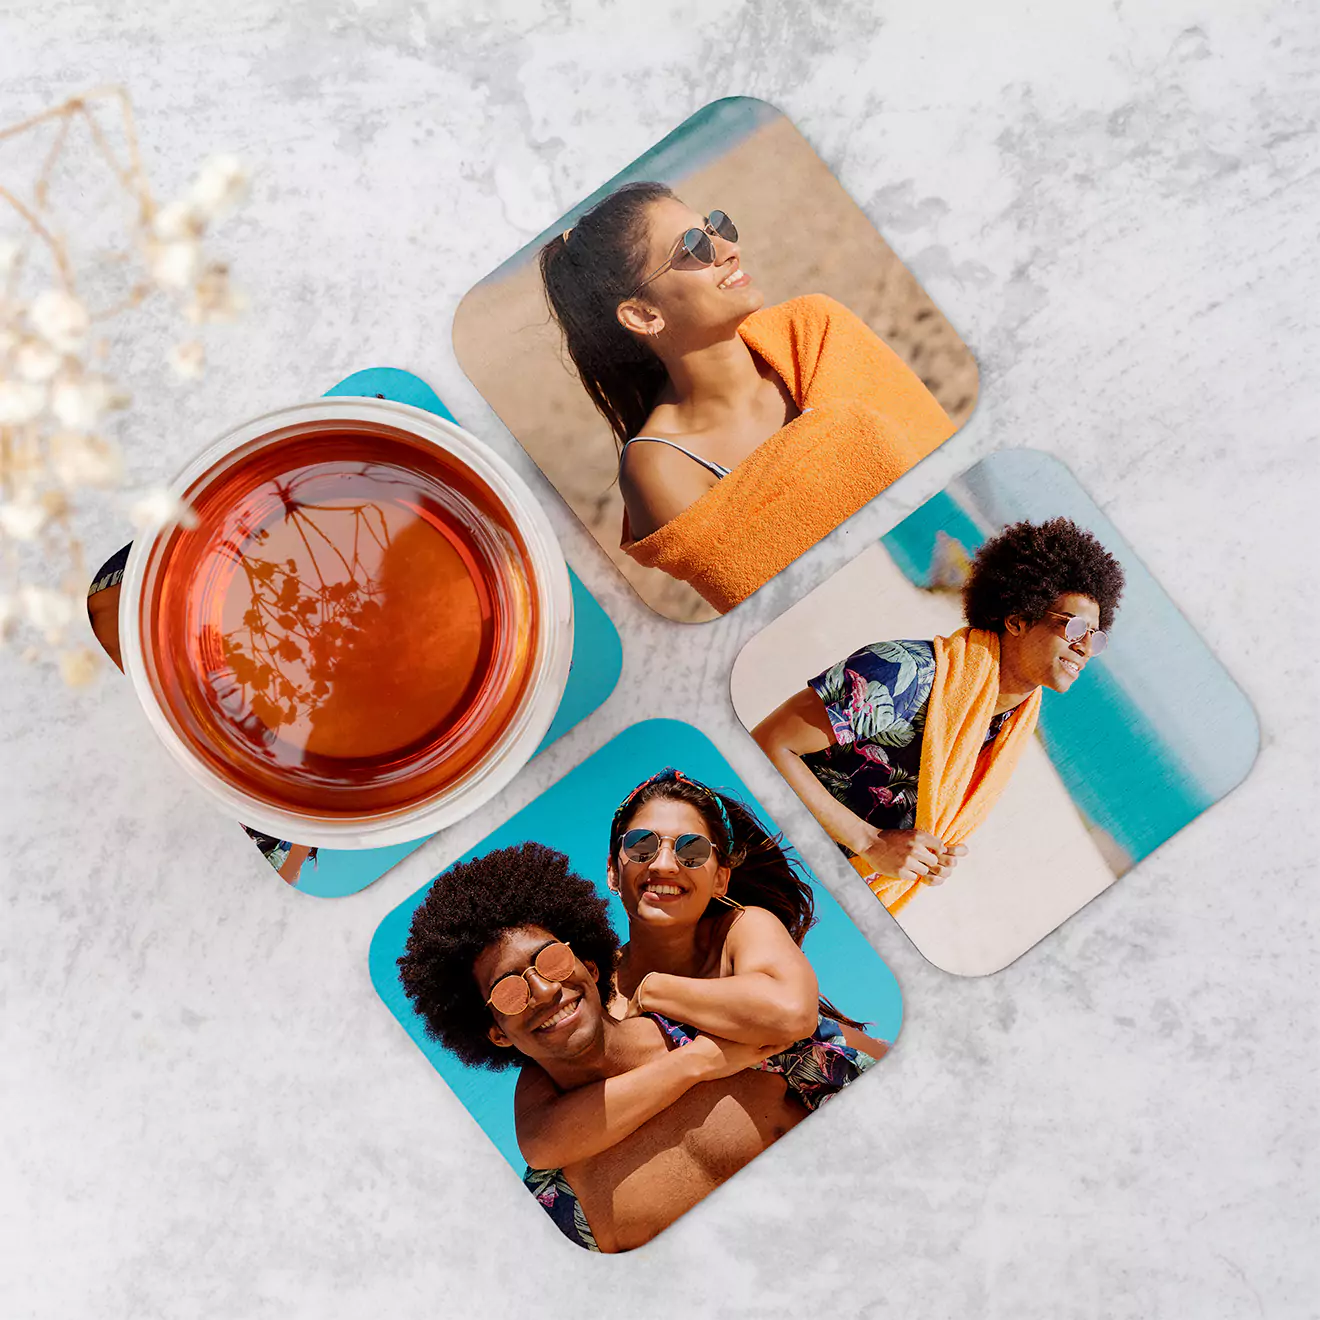 Print your own tableware online with RapidStudio and print your photos on to coasters